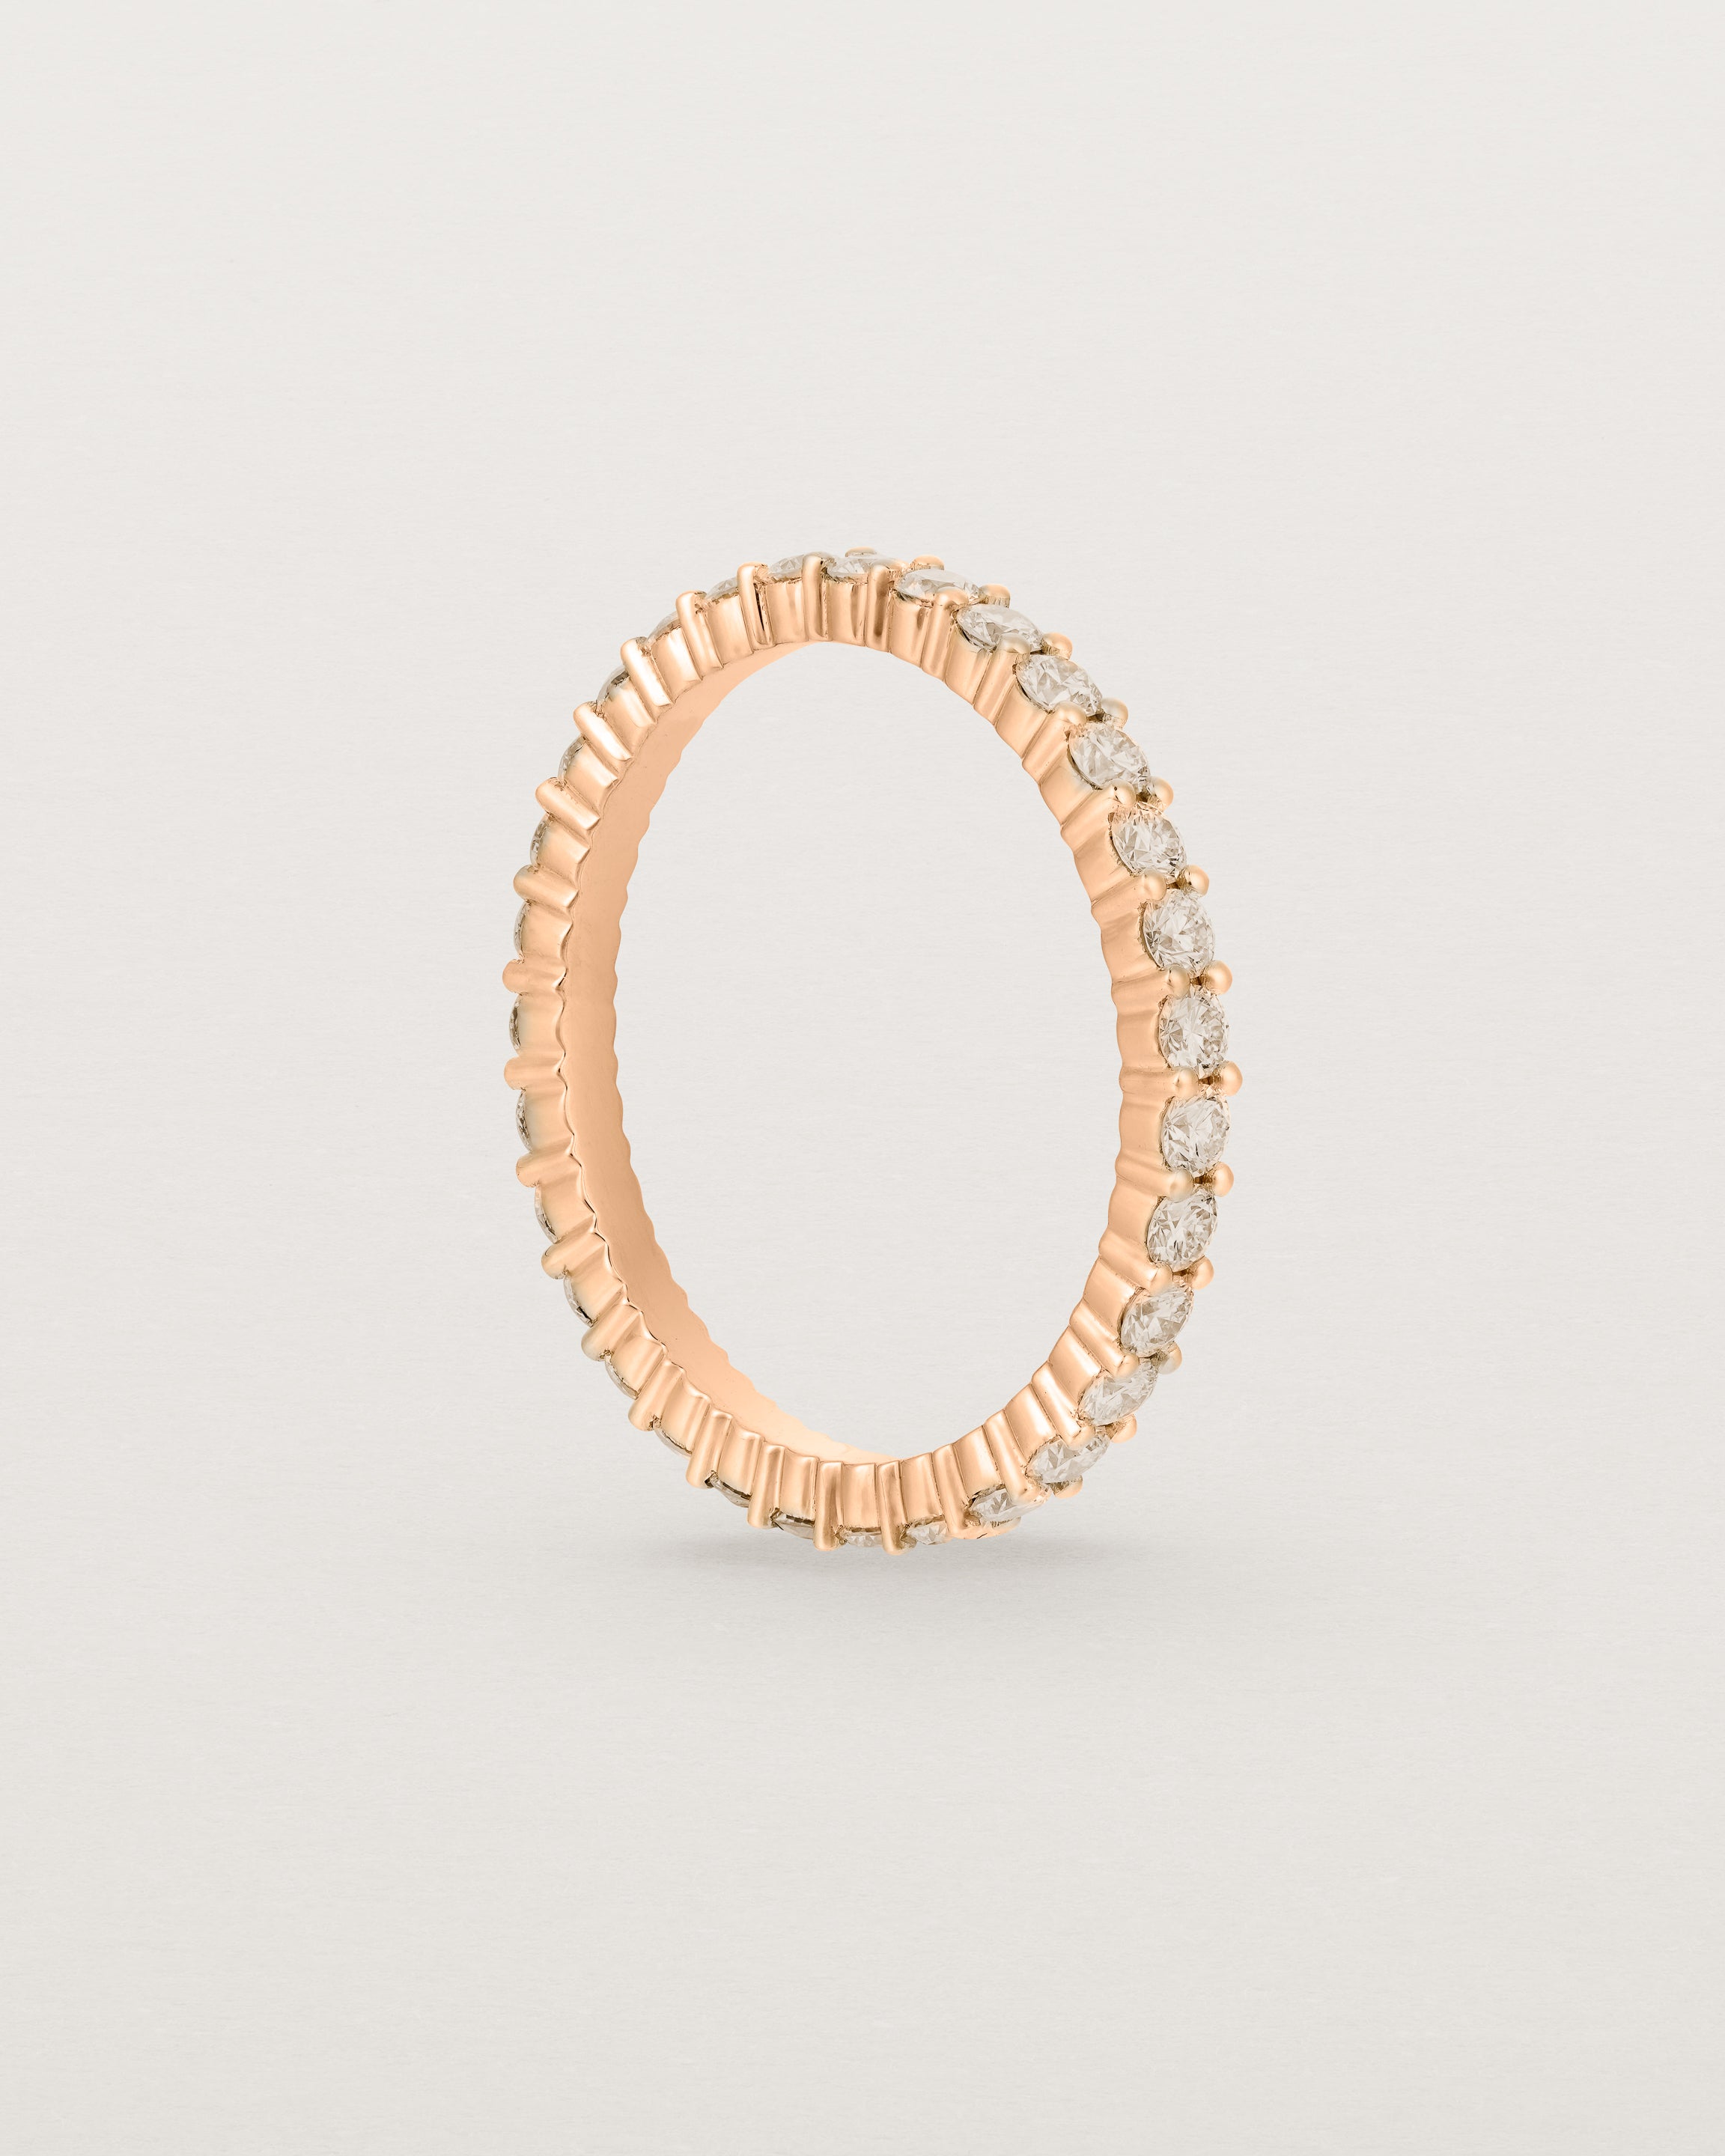 Standing view of the Grace Ring | Champagne Diamonds | Rose Gold.